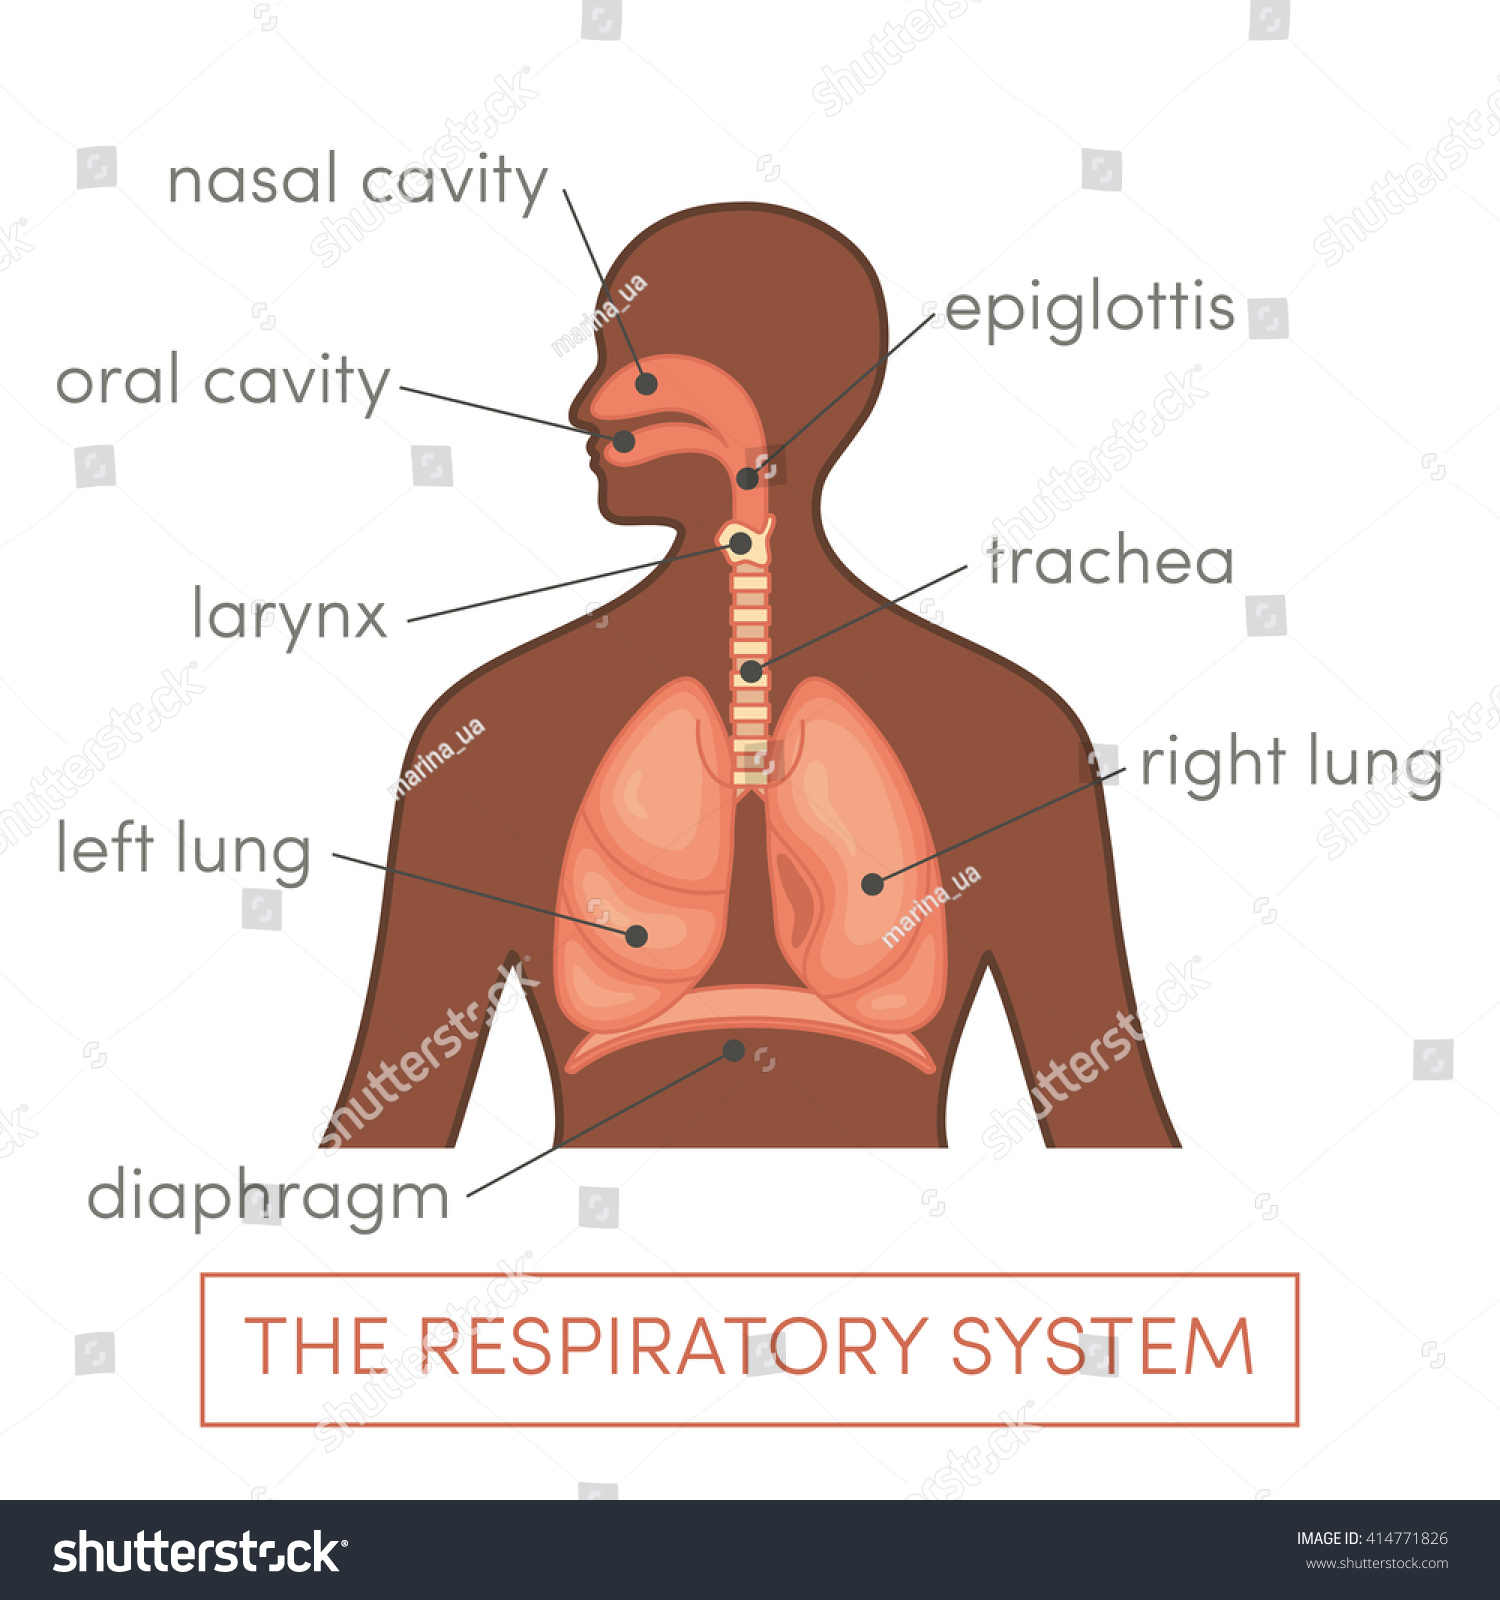 The Respiratory System Of A Human. Cartoon Vector Illustration For